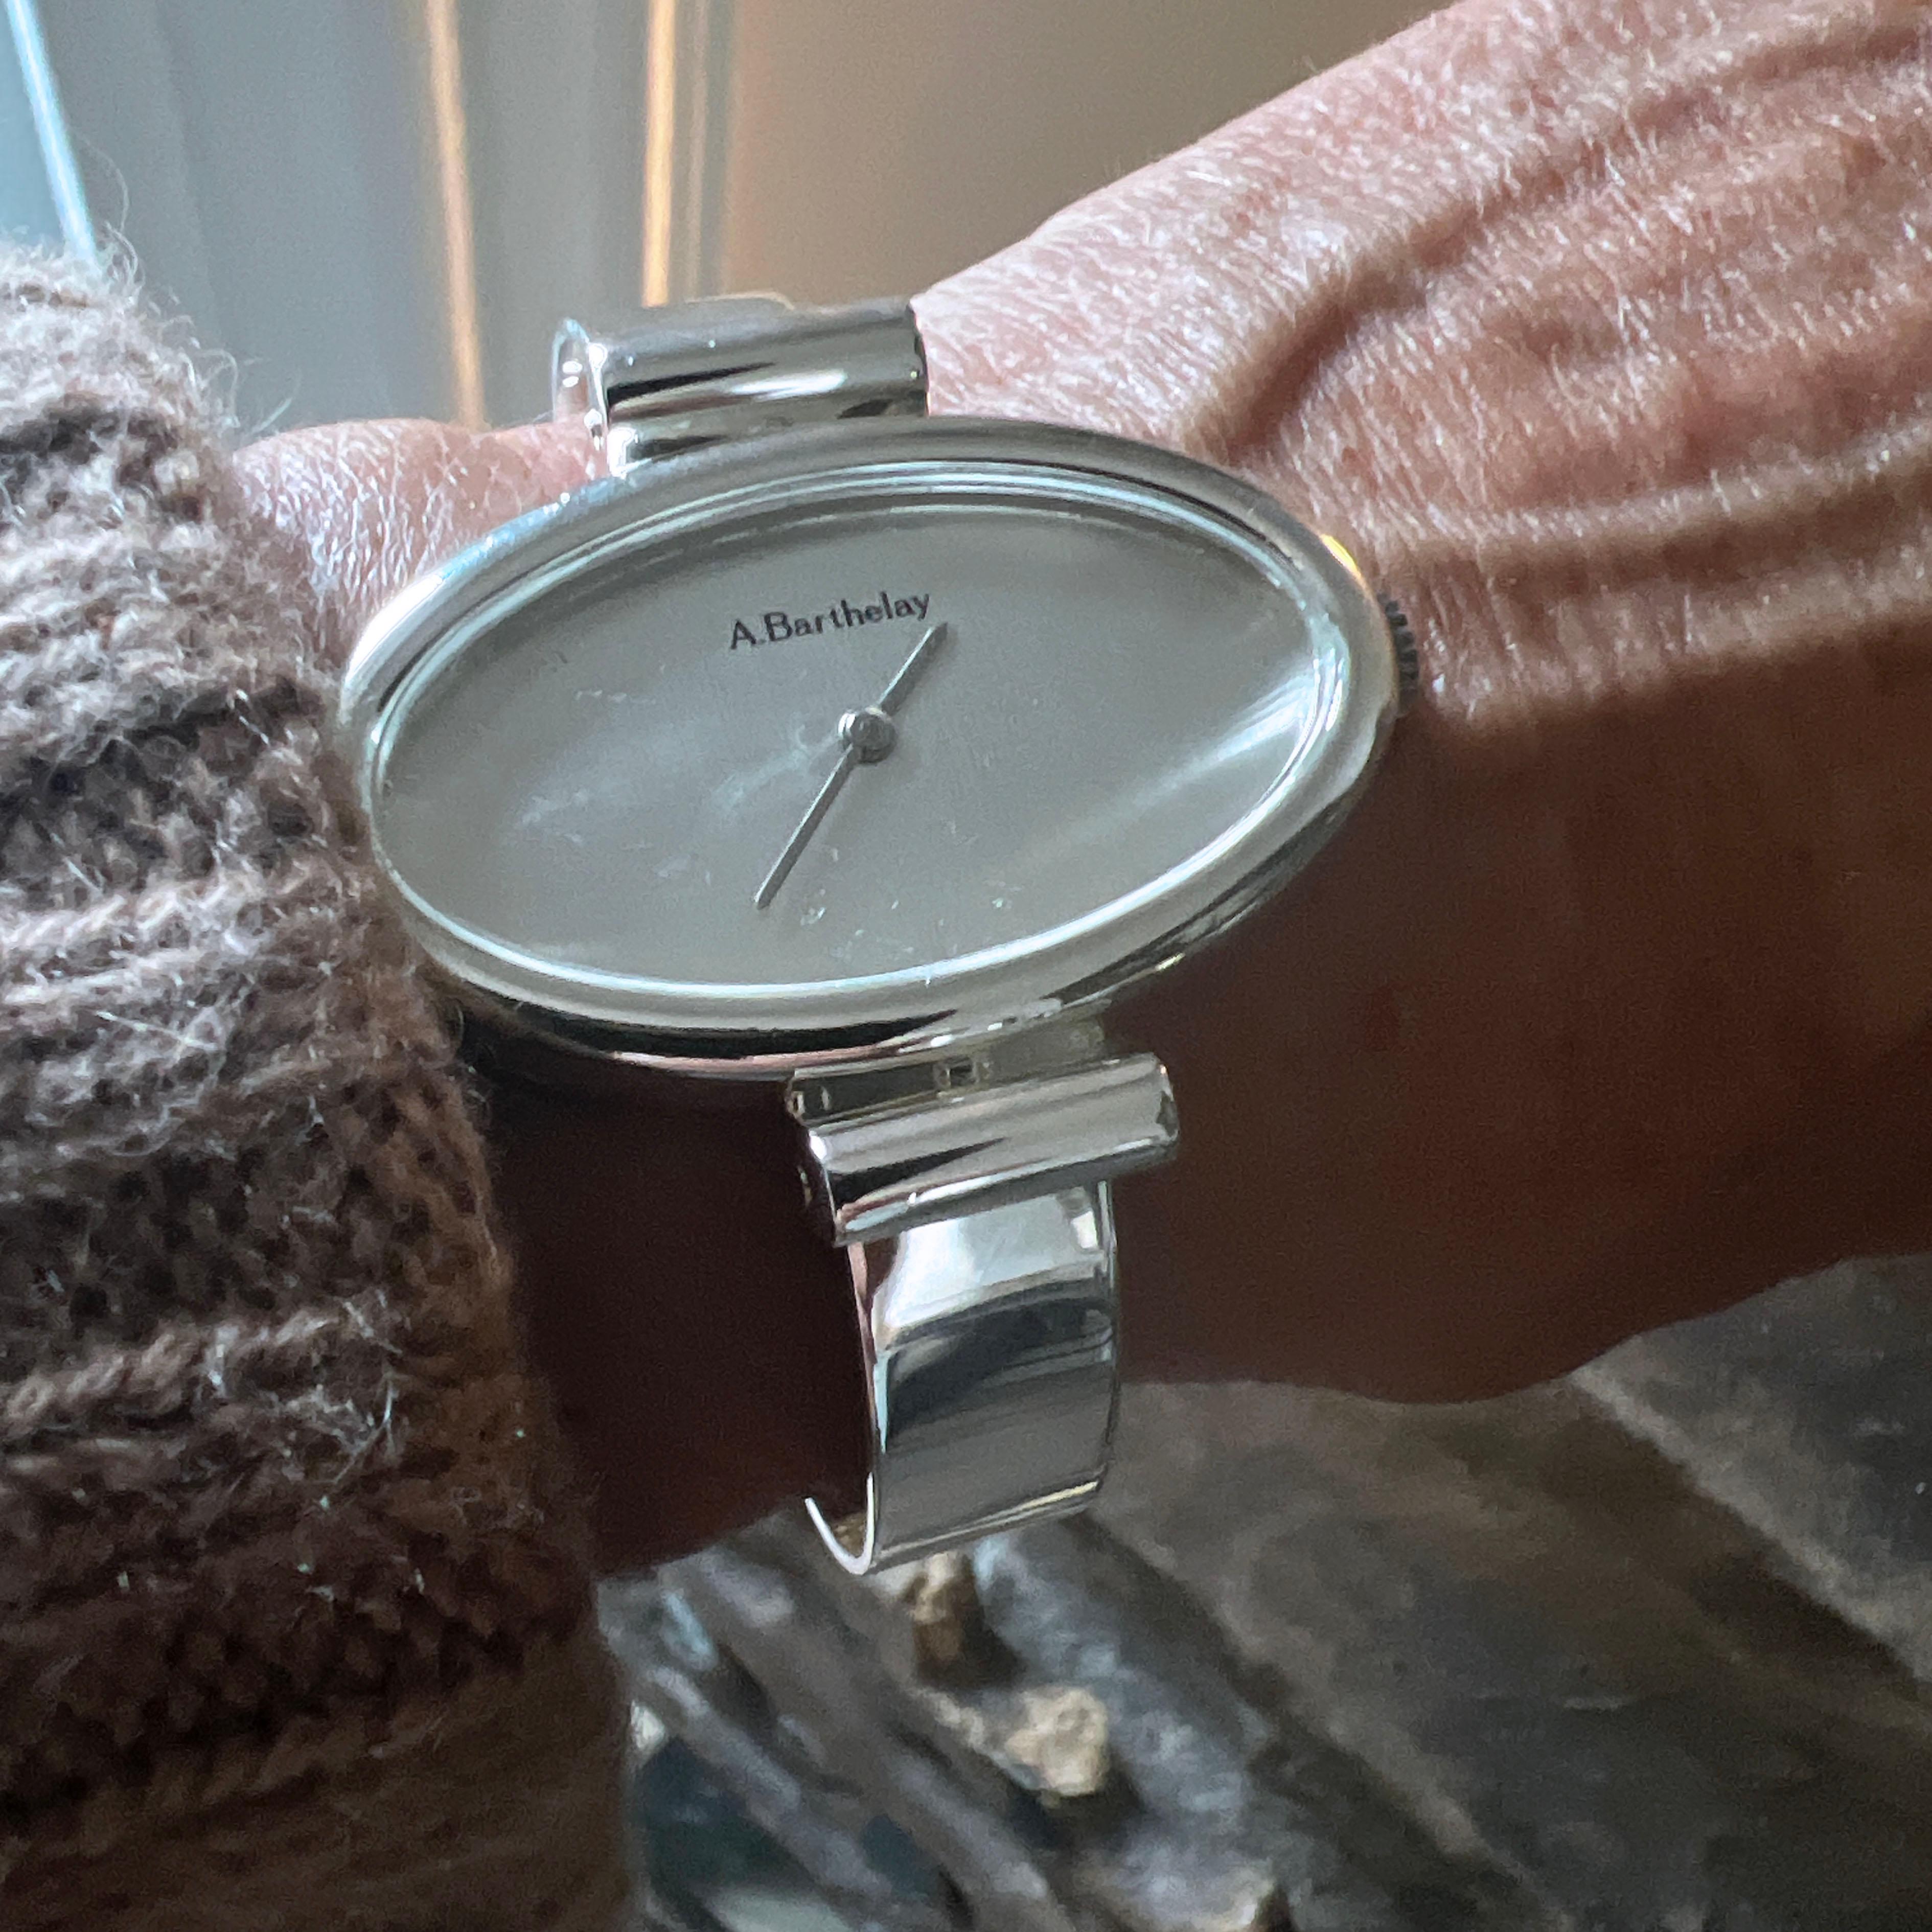 1972 Alexis Barthelay Hand-Wound Movement Elliptical Sterling Silver Watch For Sale 3